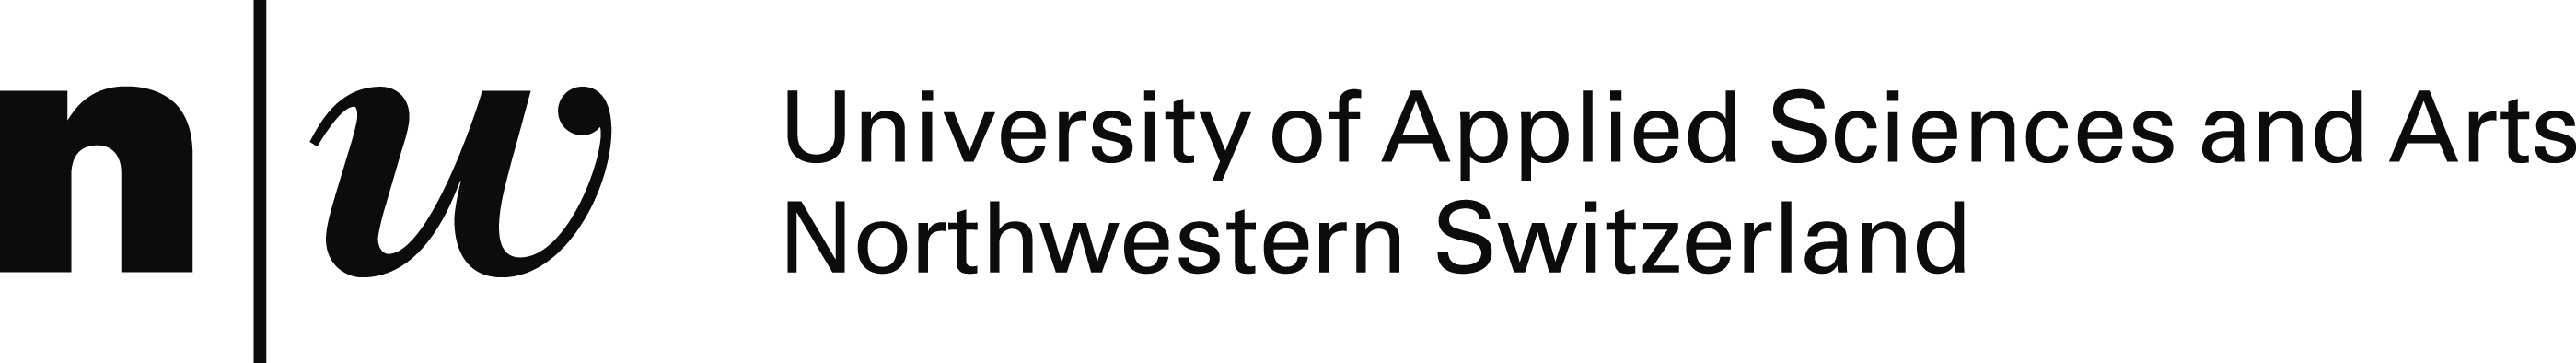 Logo: FHNW University of Applied Sciences and Arts Northwestern Switzerland, <br>Master of Sciences in Business Information Systems, <br>Intelligent Information Systems Competence Center